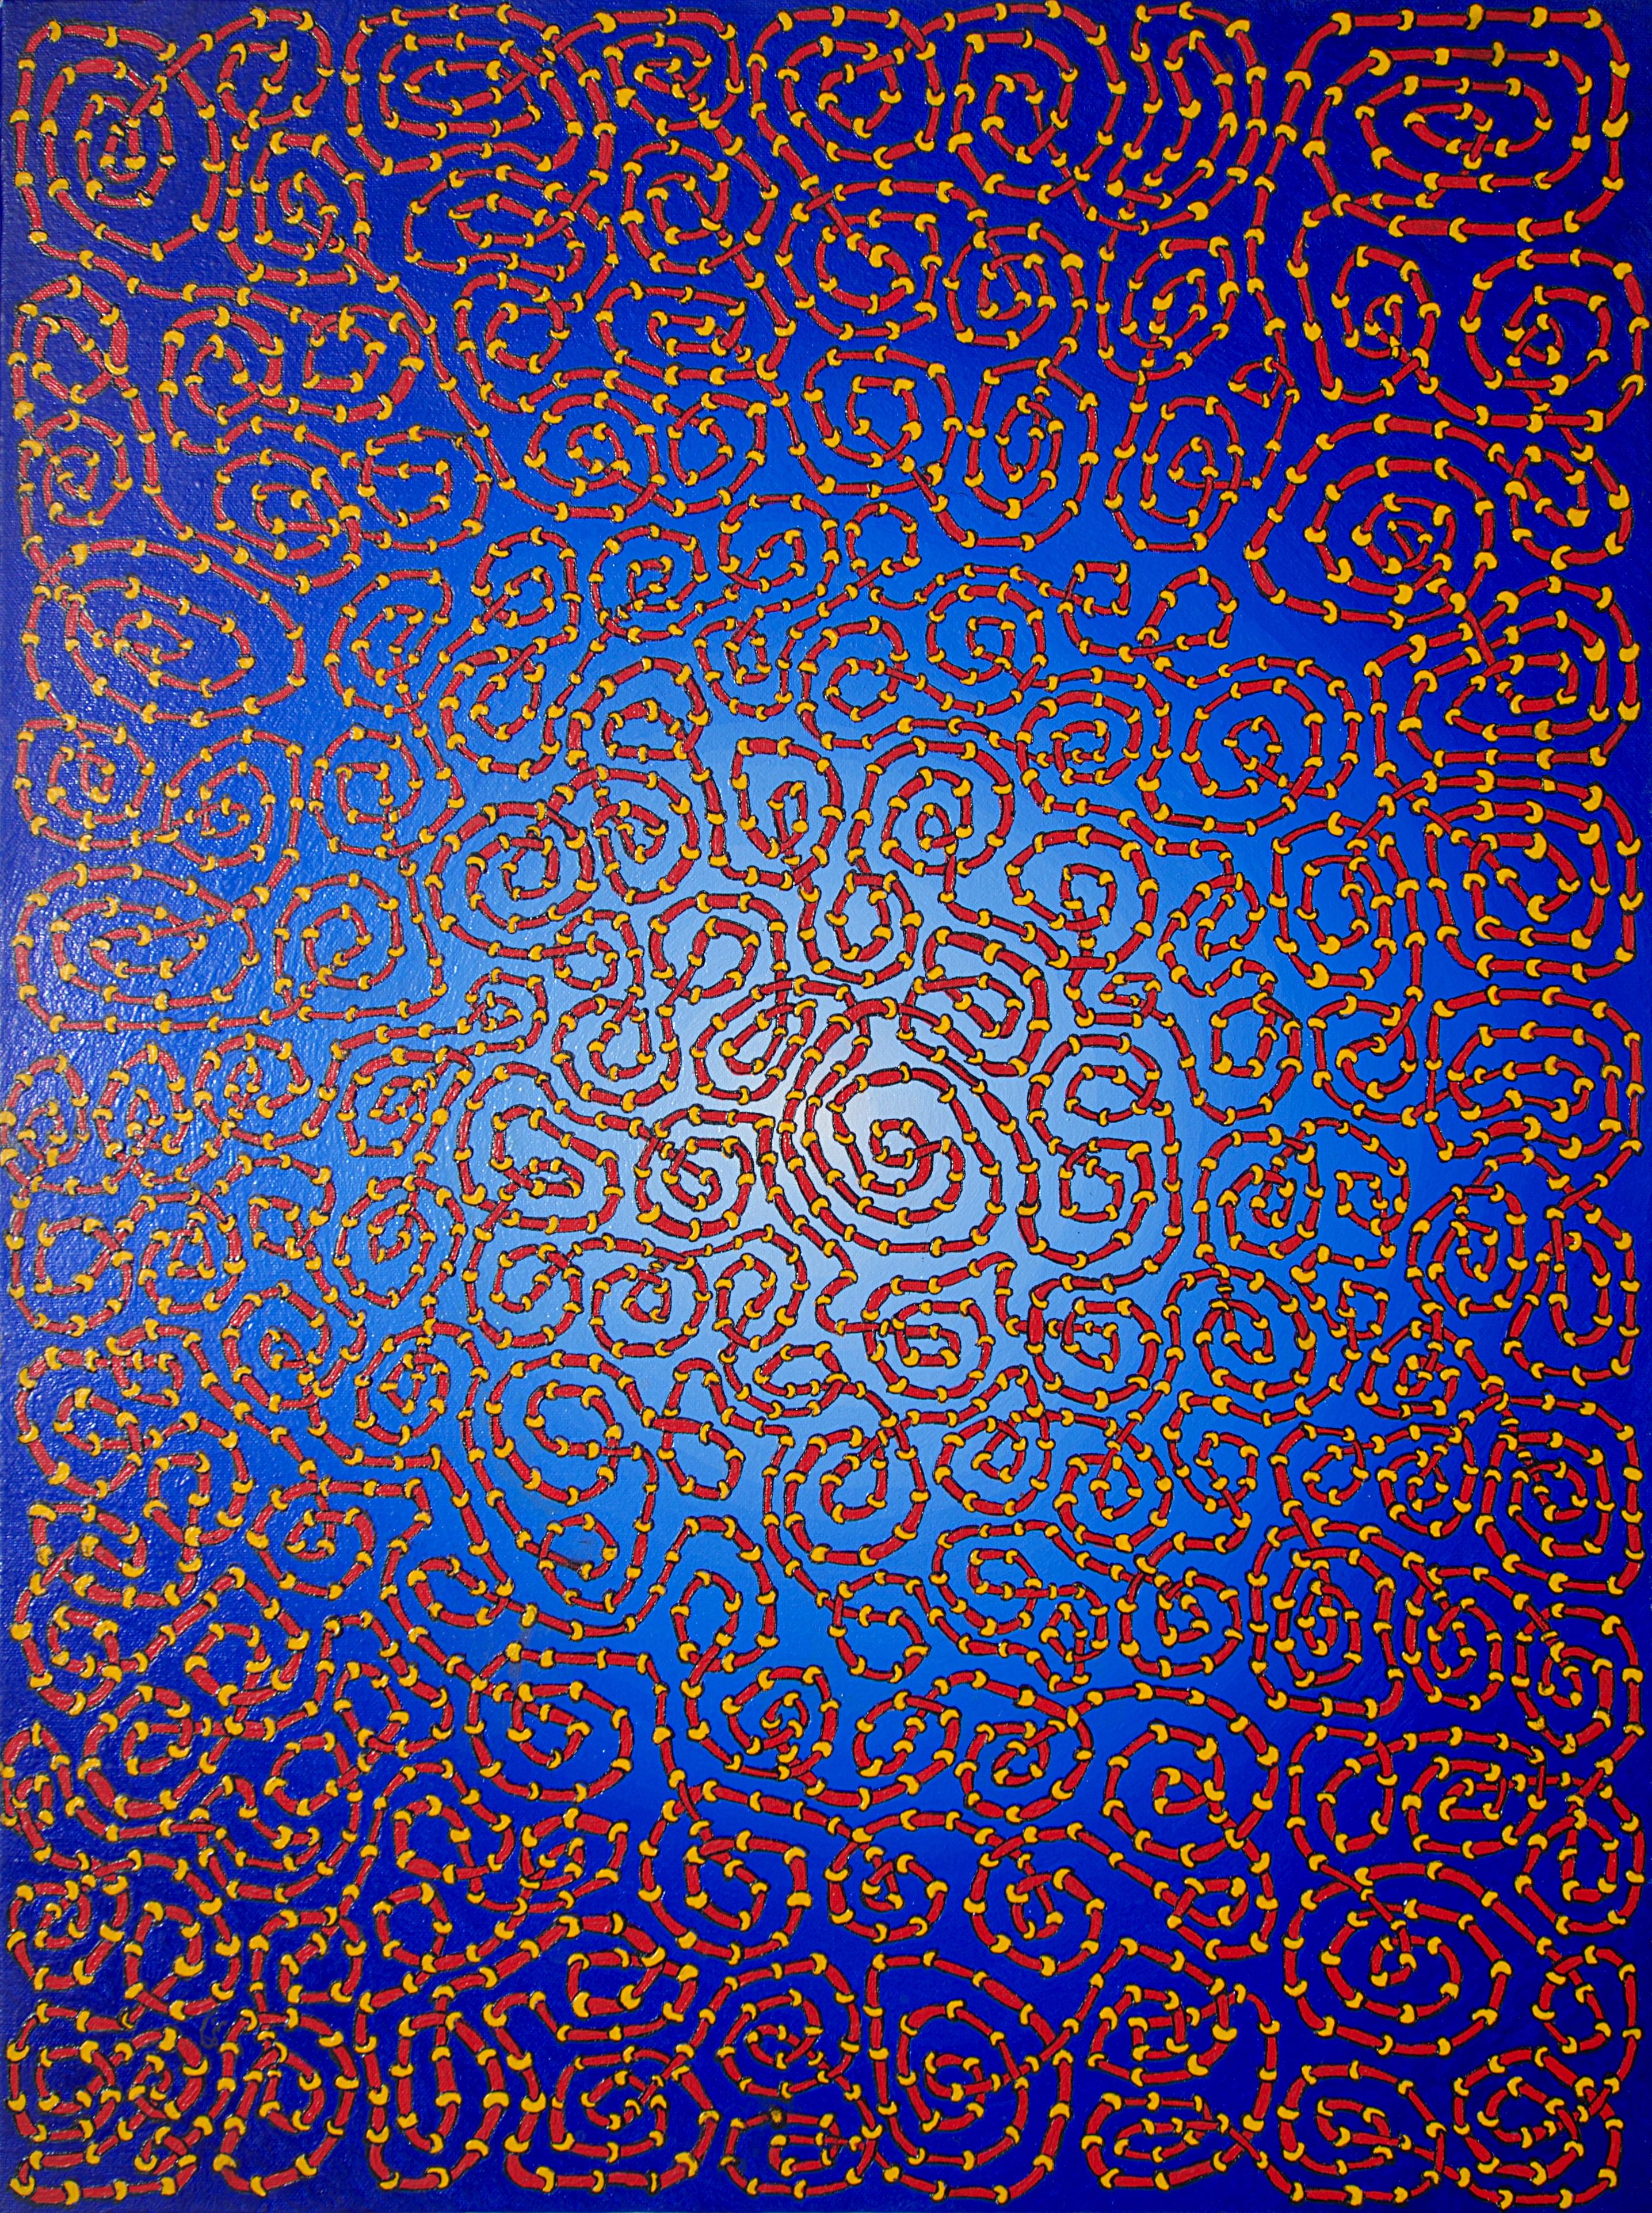 Infinite Tangled Red and Yellow Pipes on Radial Blue Gradient Oil Painting